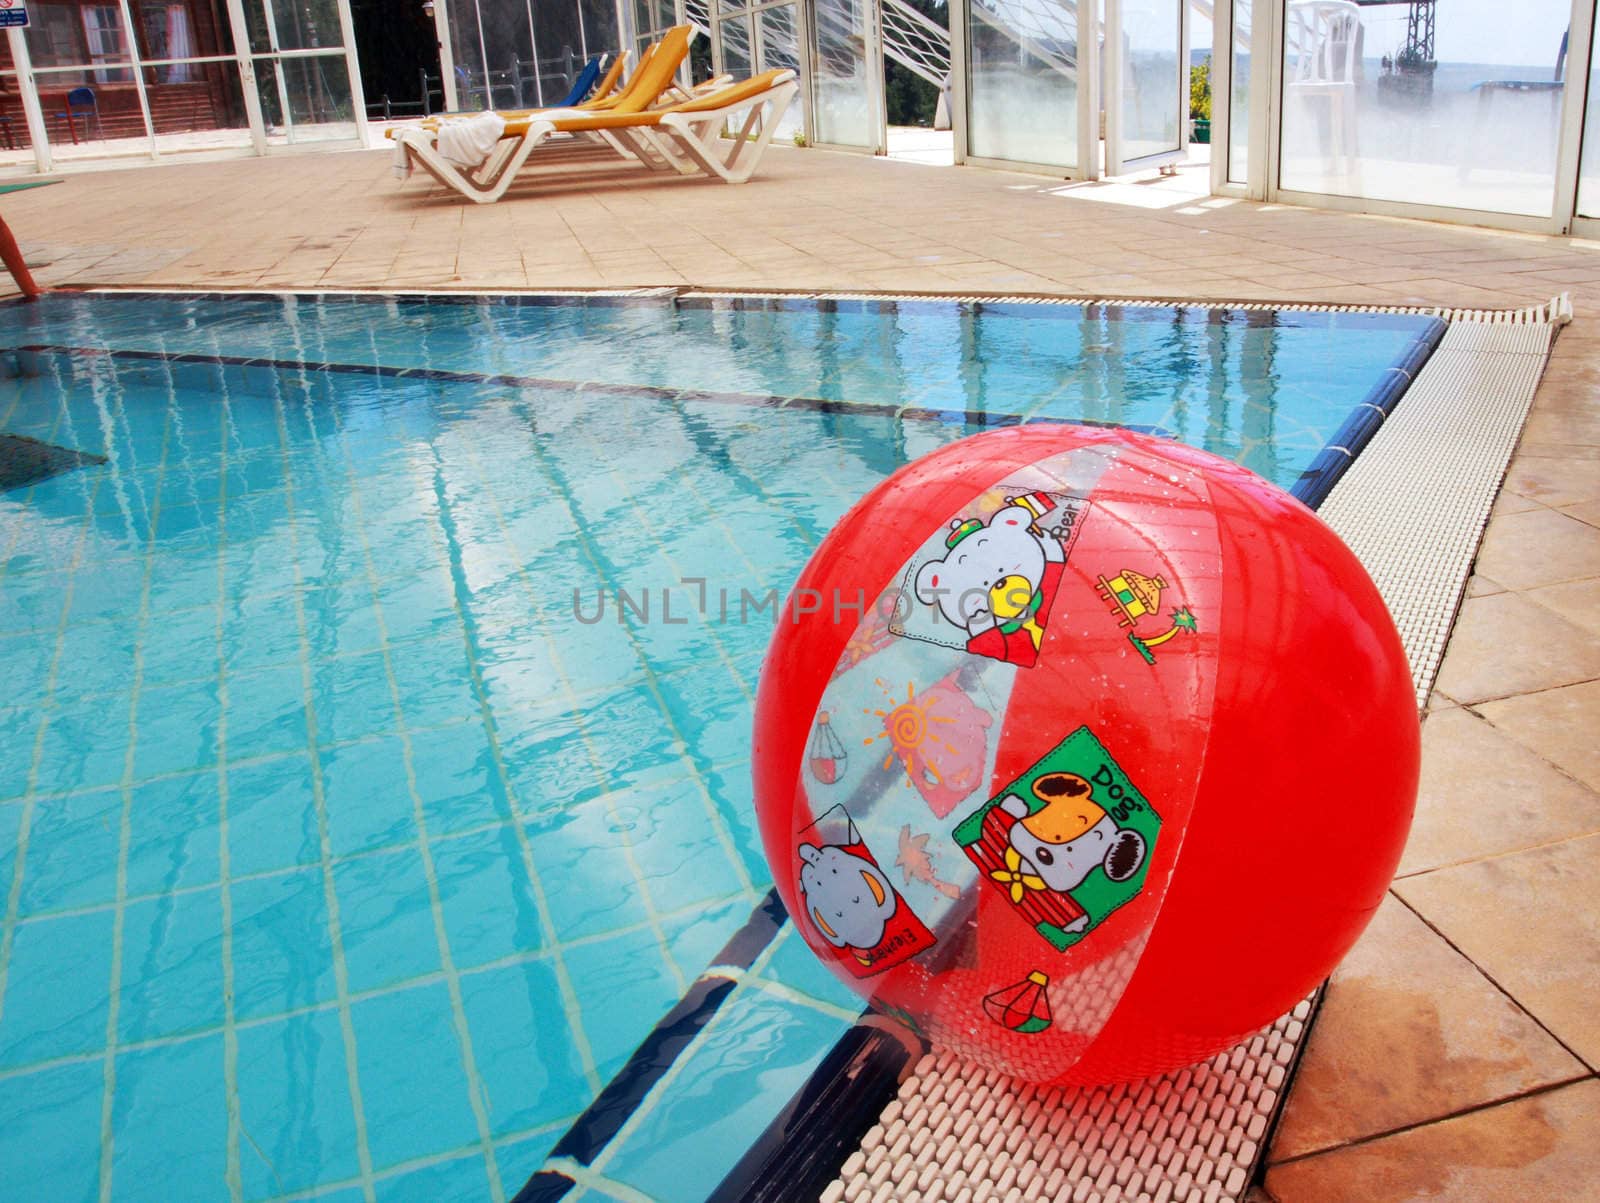 Swimming pool  scene: brihgt colored red inflatable ball close to the water.
Nice contrast between red and blue.  Clear reflection of glass wall on a  smooth water surface.